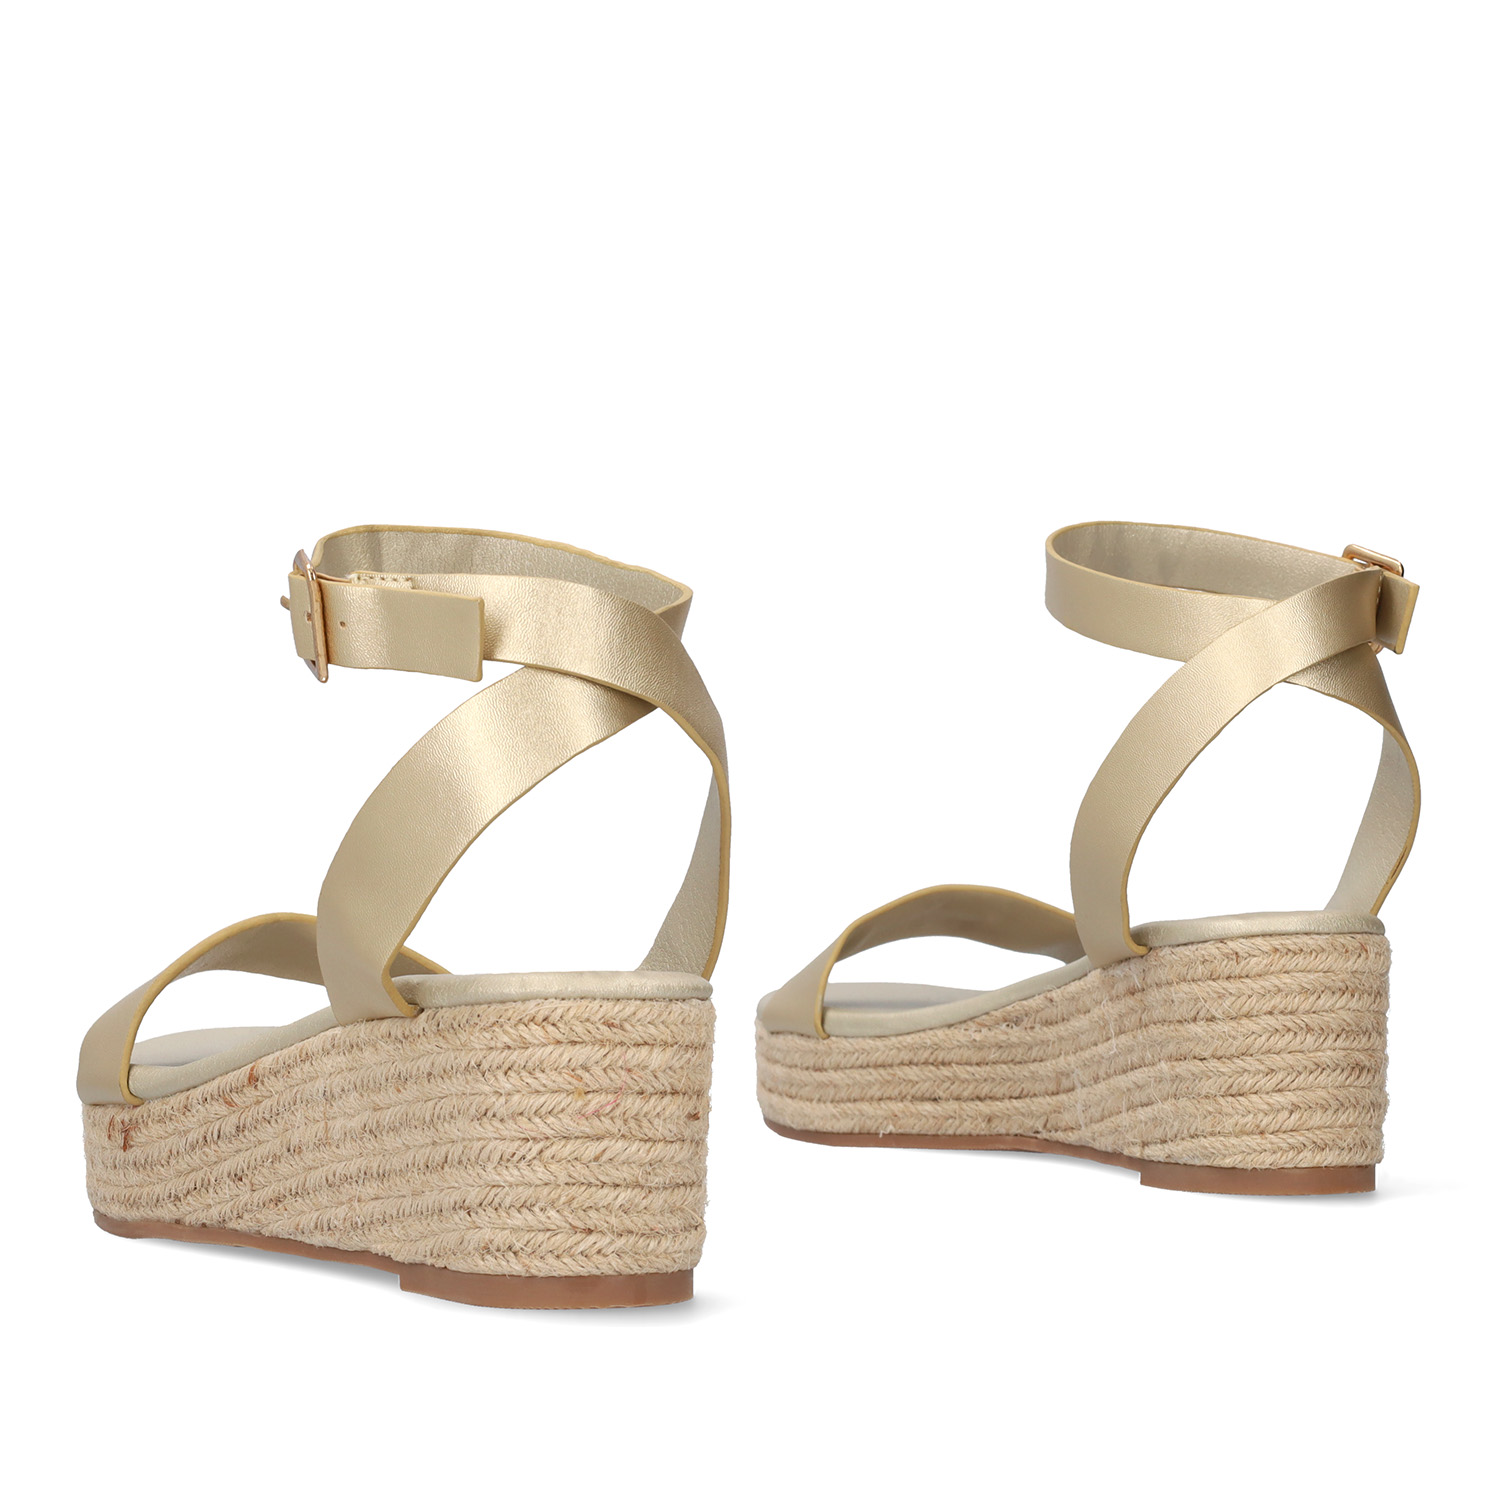 Gold soft sandals with a jute wedge 